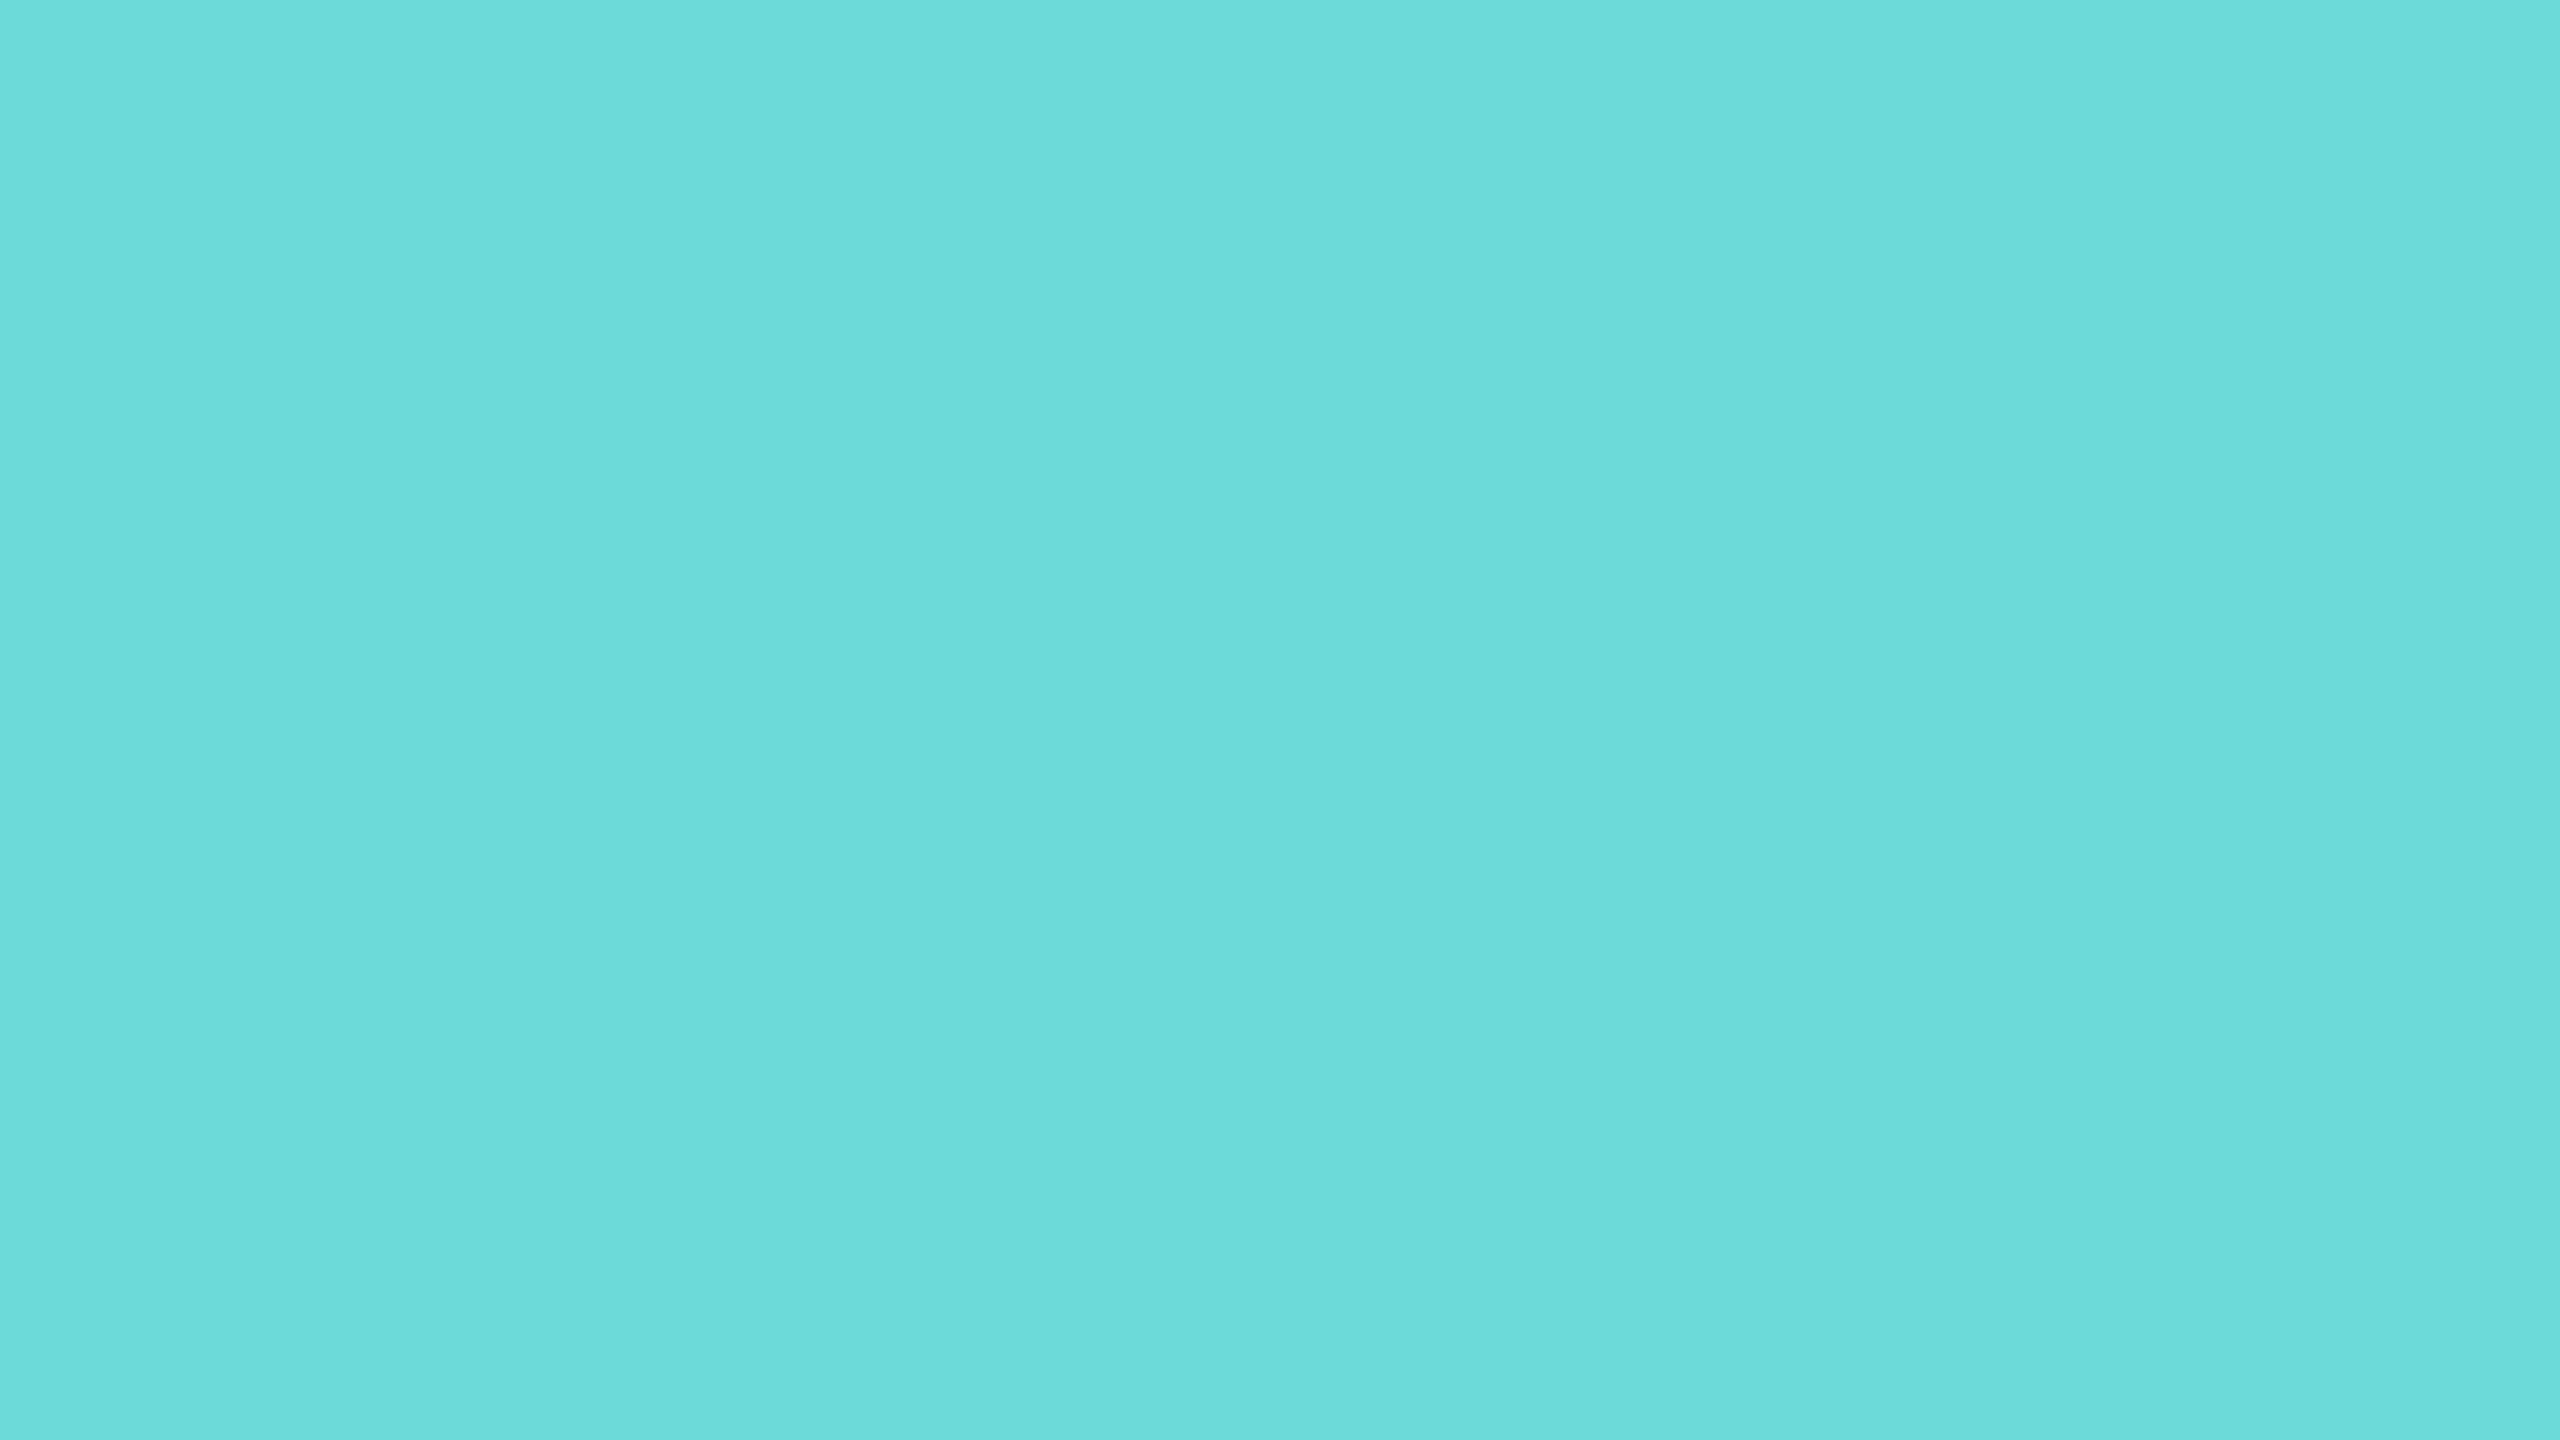 Elegant and classy Tiffany blue background For any occasion